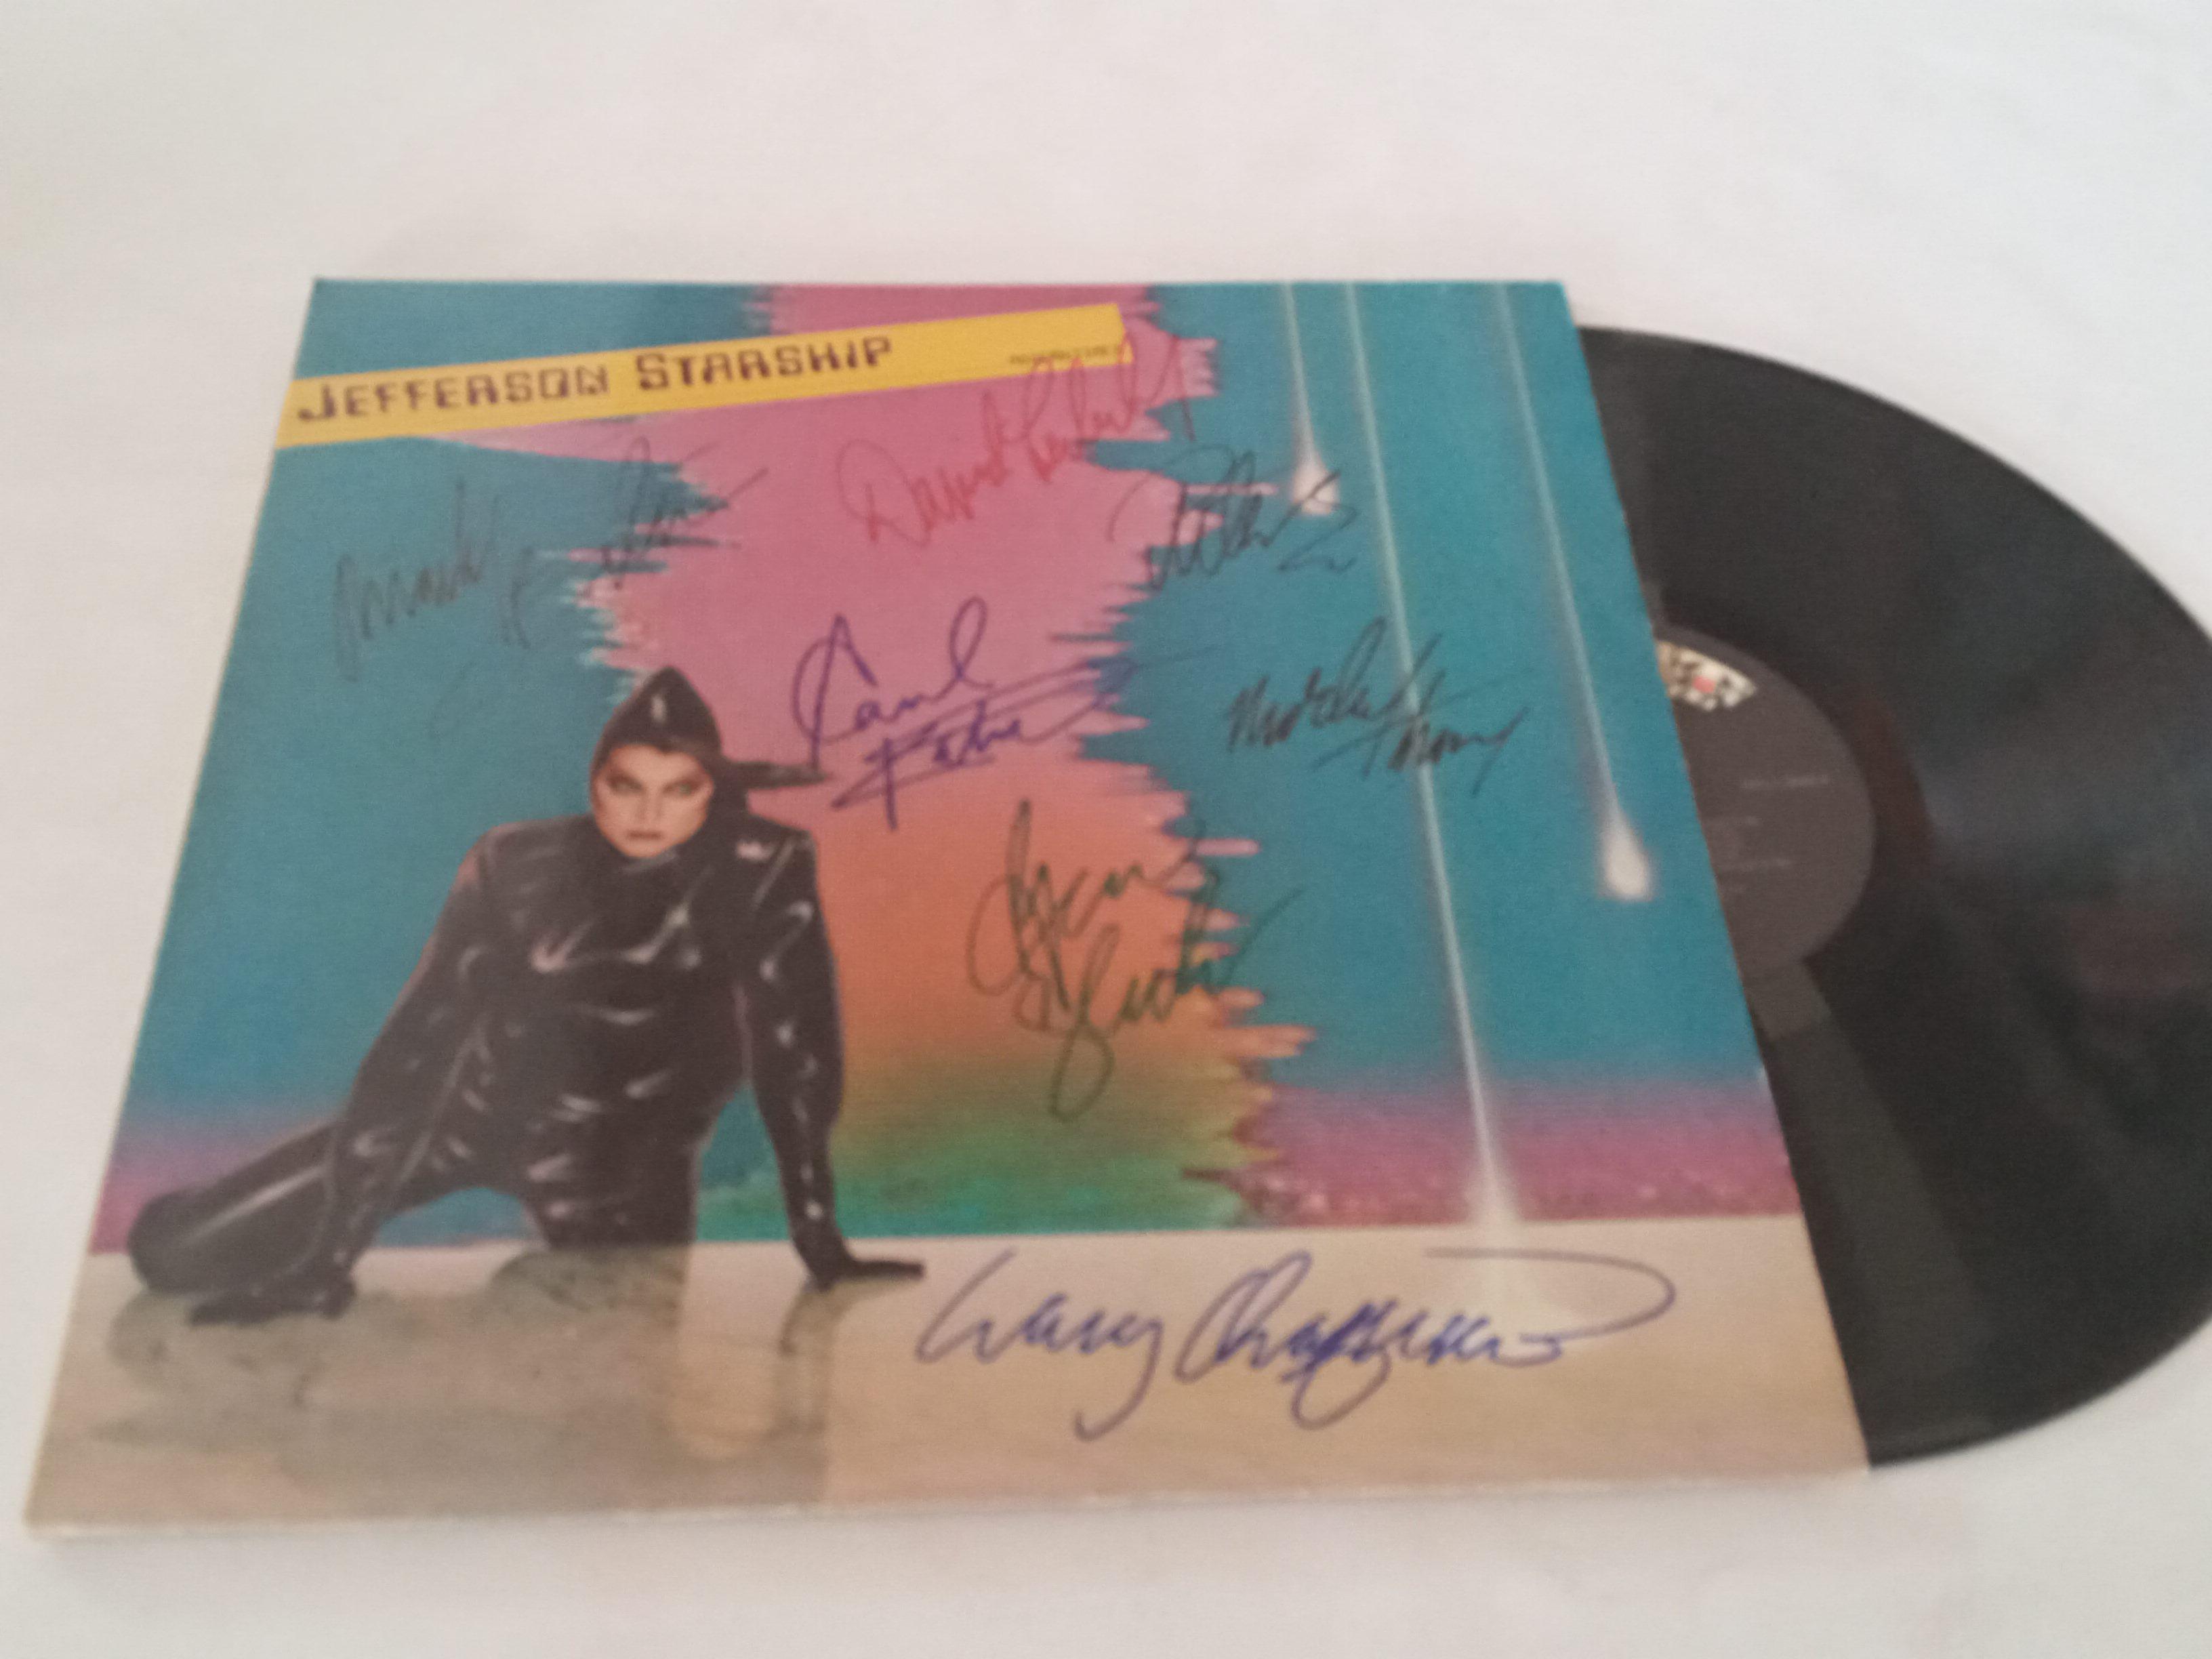 Grace Slick, Paul Kantor, Mickey Thomas, Jefferson Starship band signed LP "Modern Times" with proof